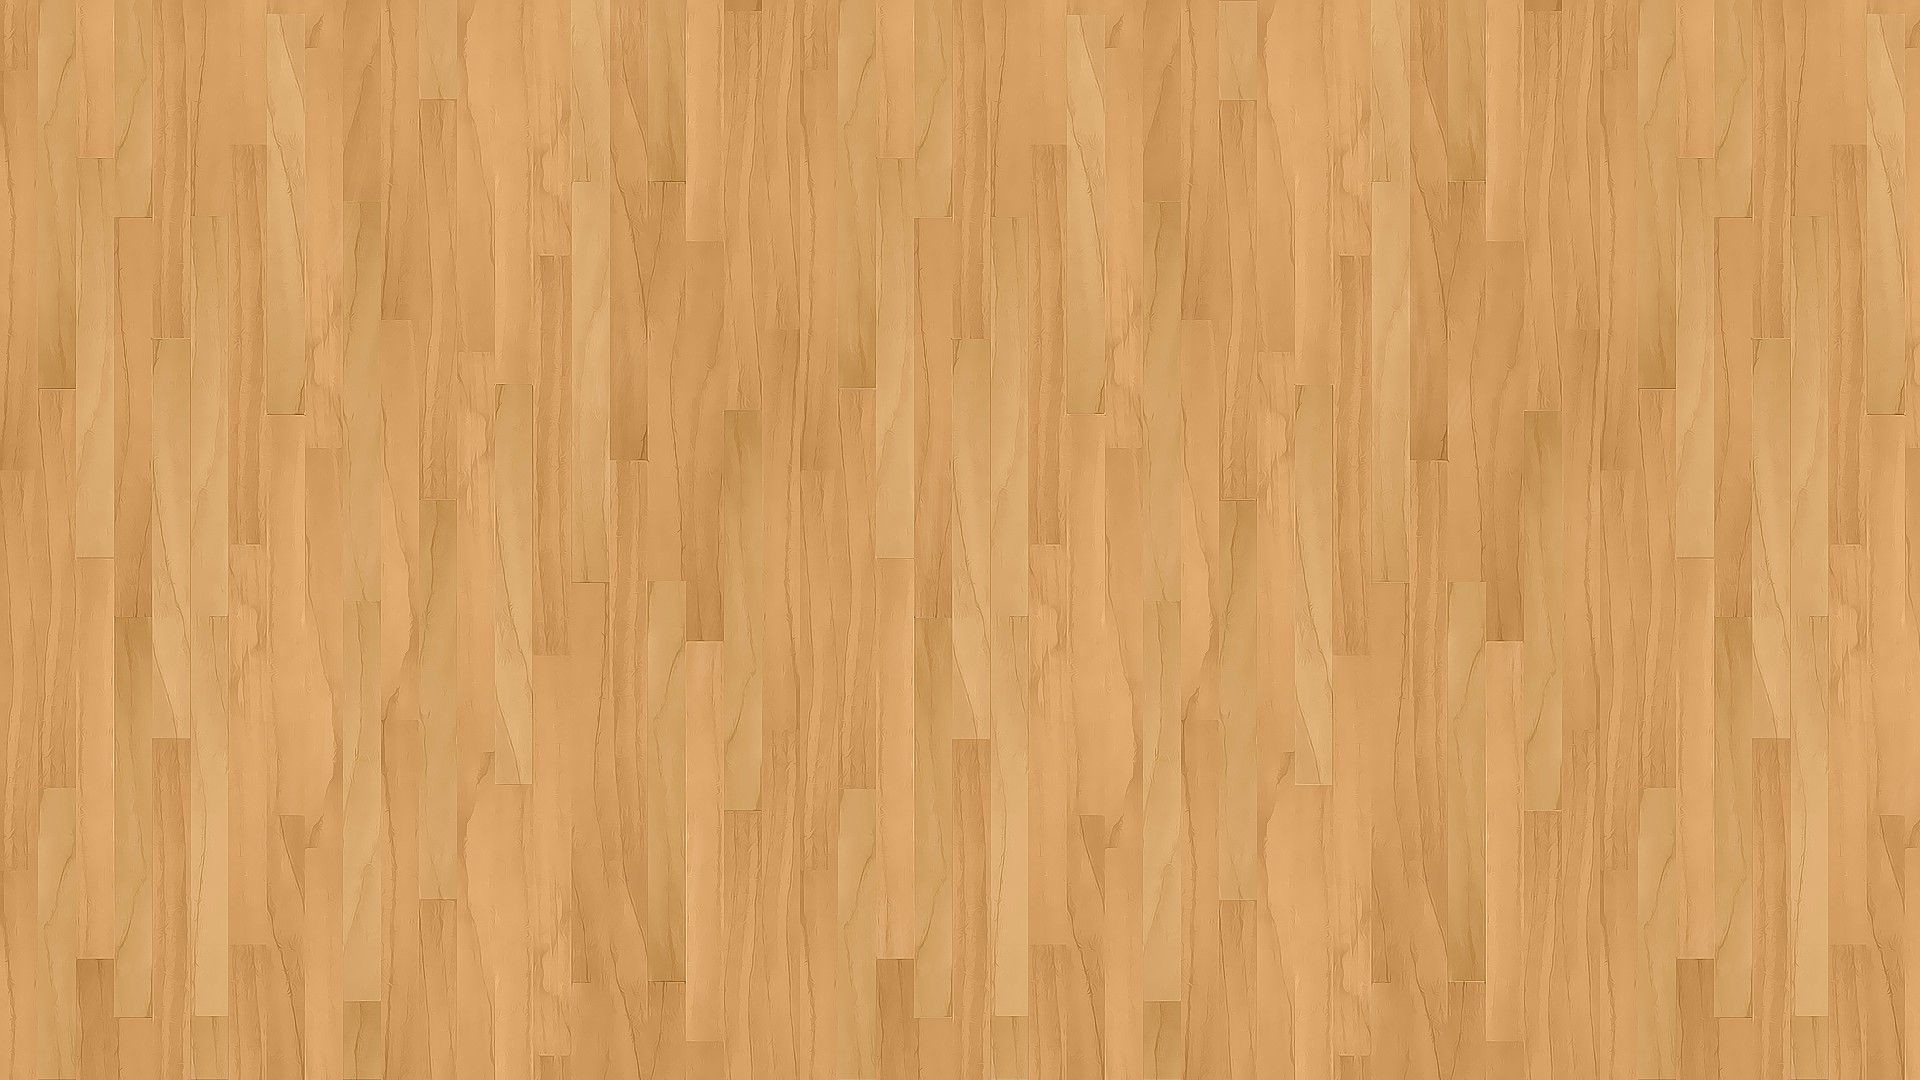 1920x1080, Wood Hd Wallpapers Backgrounds Wallpaper - Plywood - HD Wallpaper 